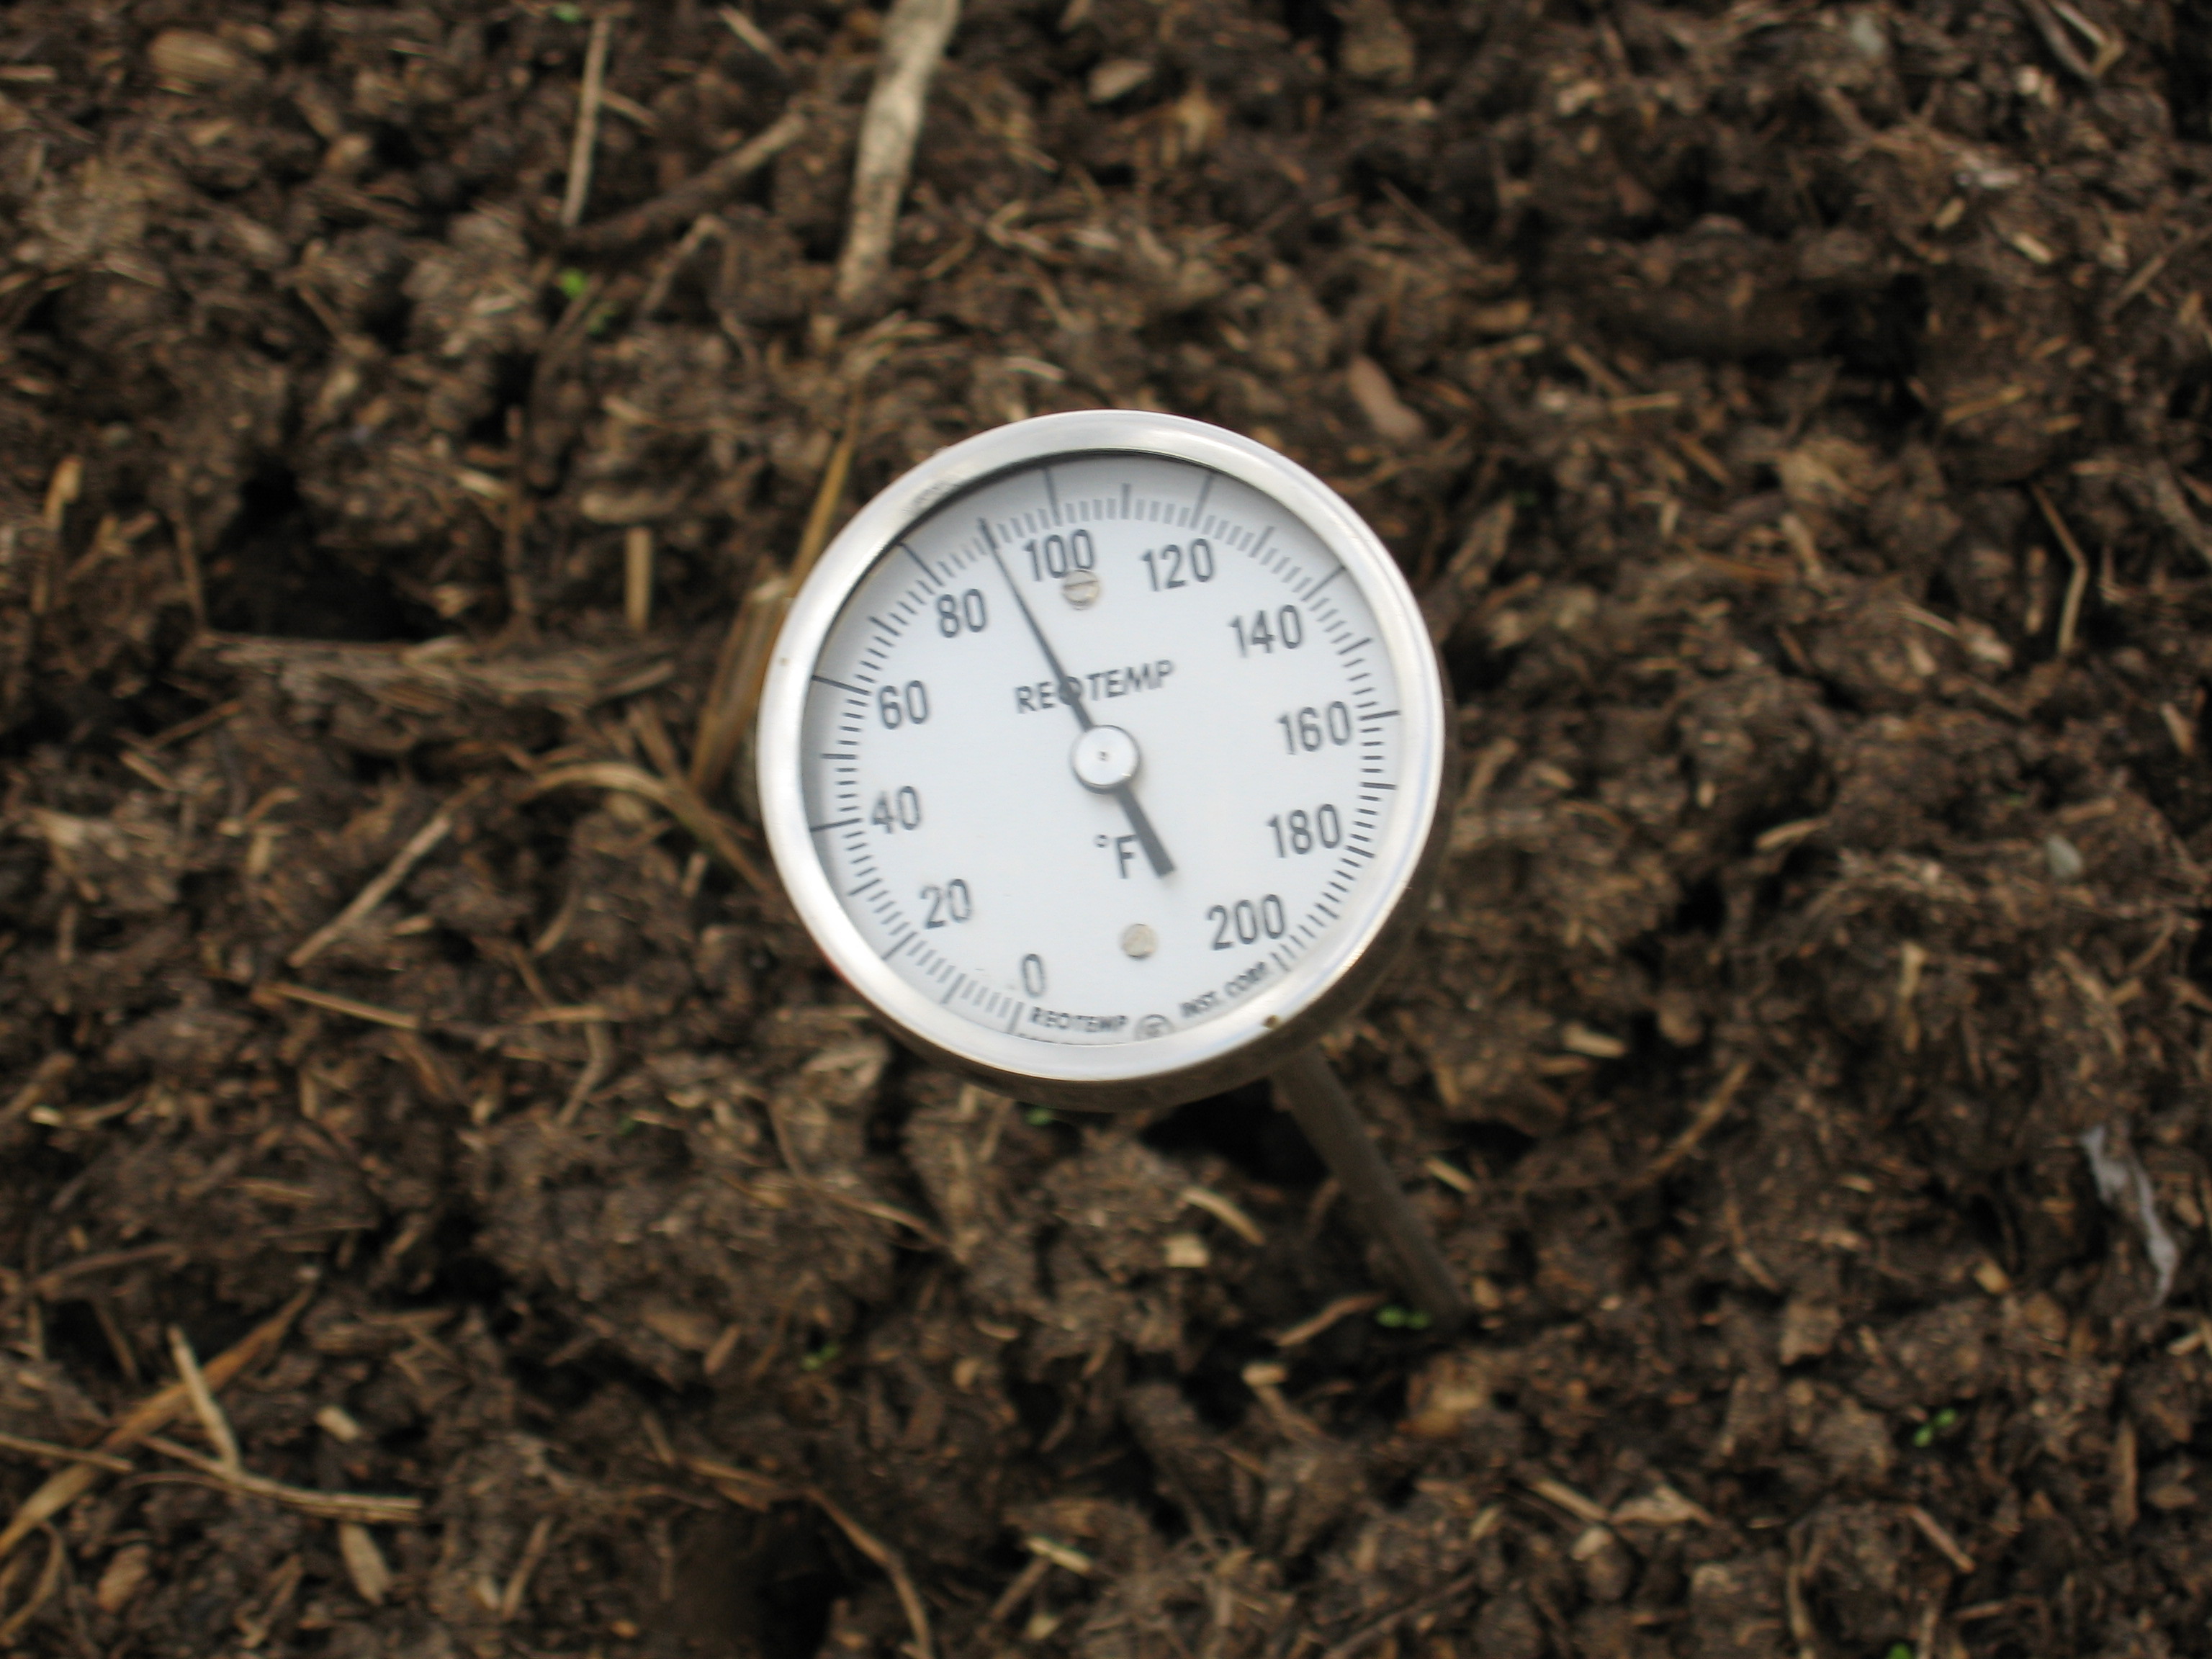 Use a thermometer to measure the temperature of your compost pile